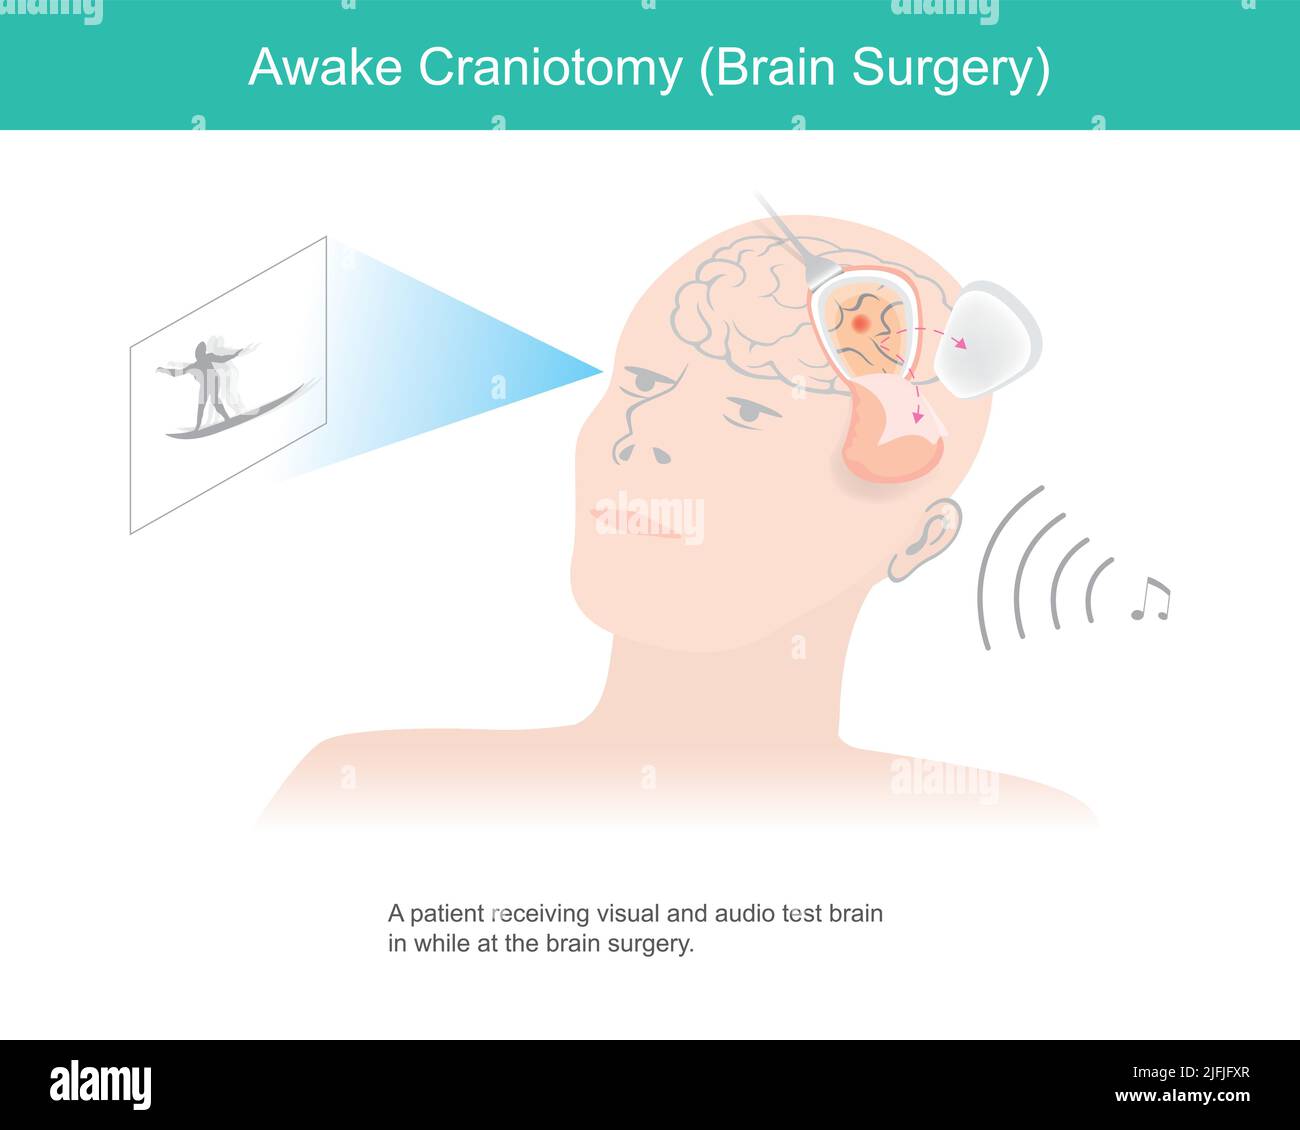 Awake craniotomy. A patient receiving visual and audio test brain in while at brain surgery. Stock Vector